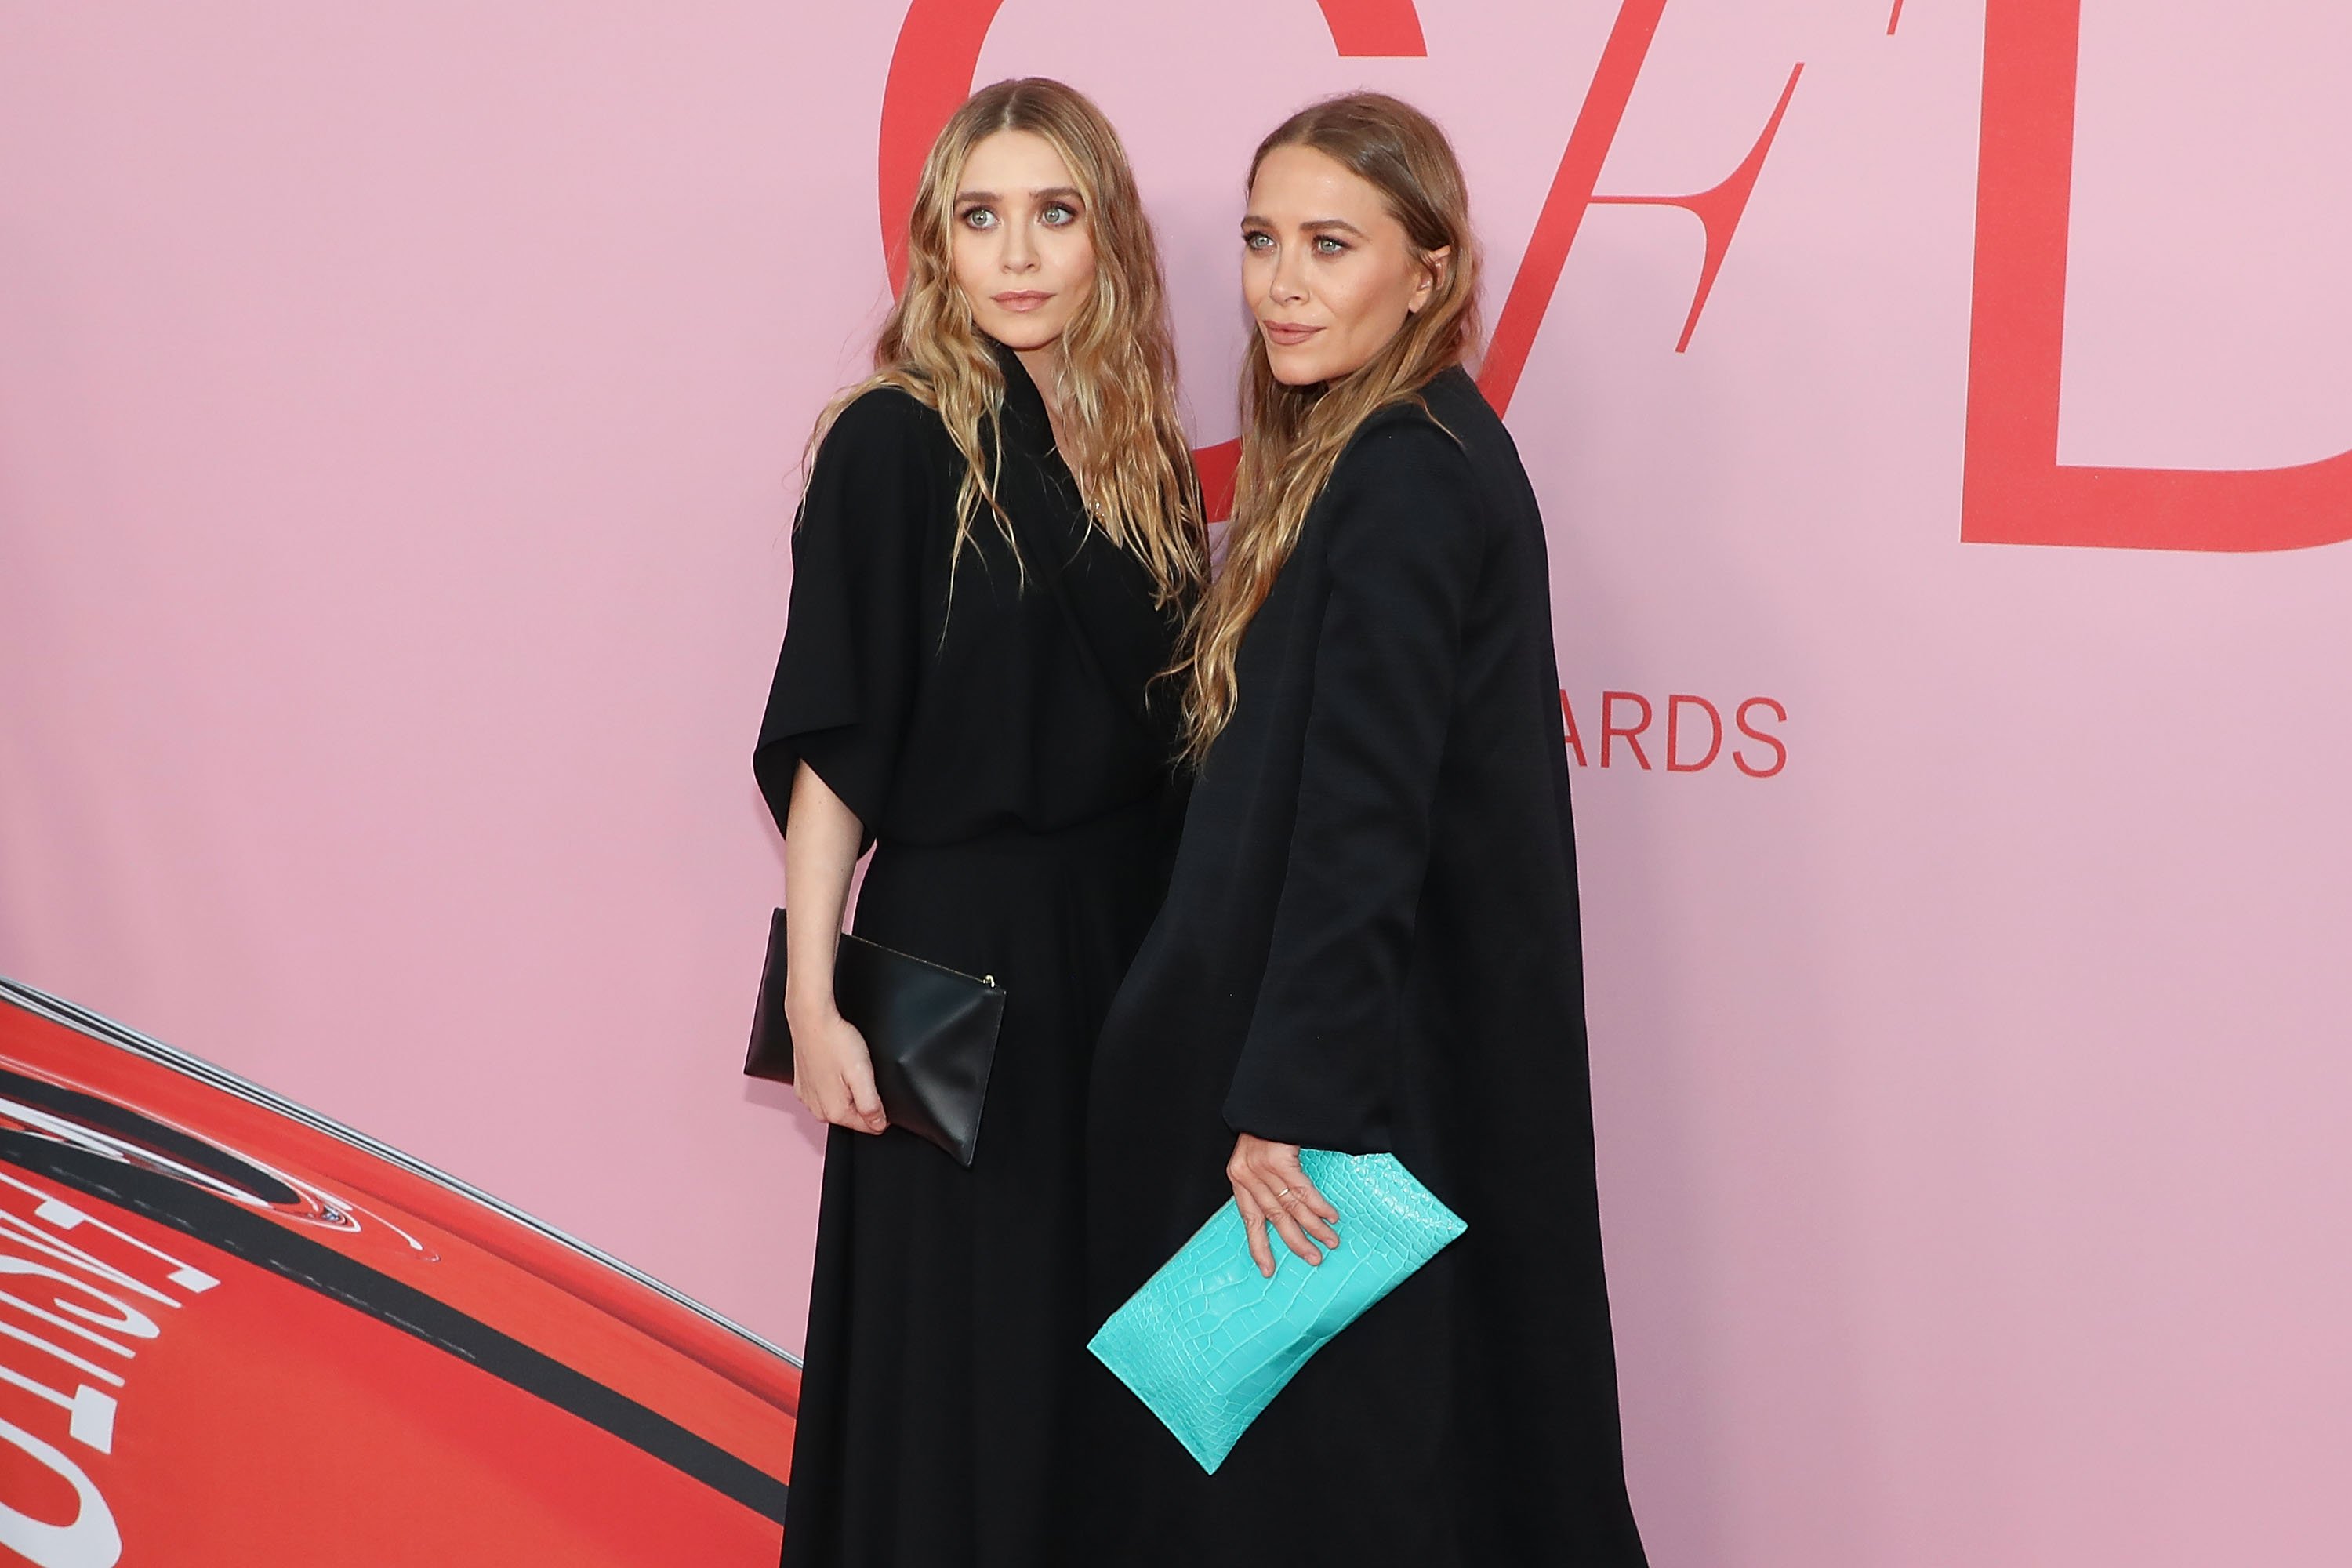 Mary-Kate Olsen and Ashley Olsen at the 2019 CFDA Fashion Awards at The Brooklyn Museum on June 3, 2019 in New York City. | Source: Getty Images